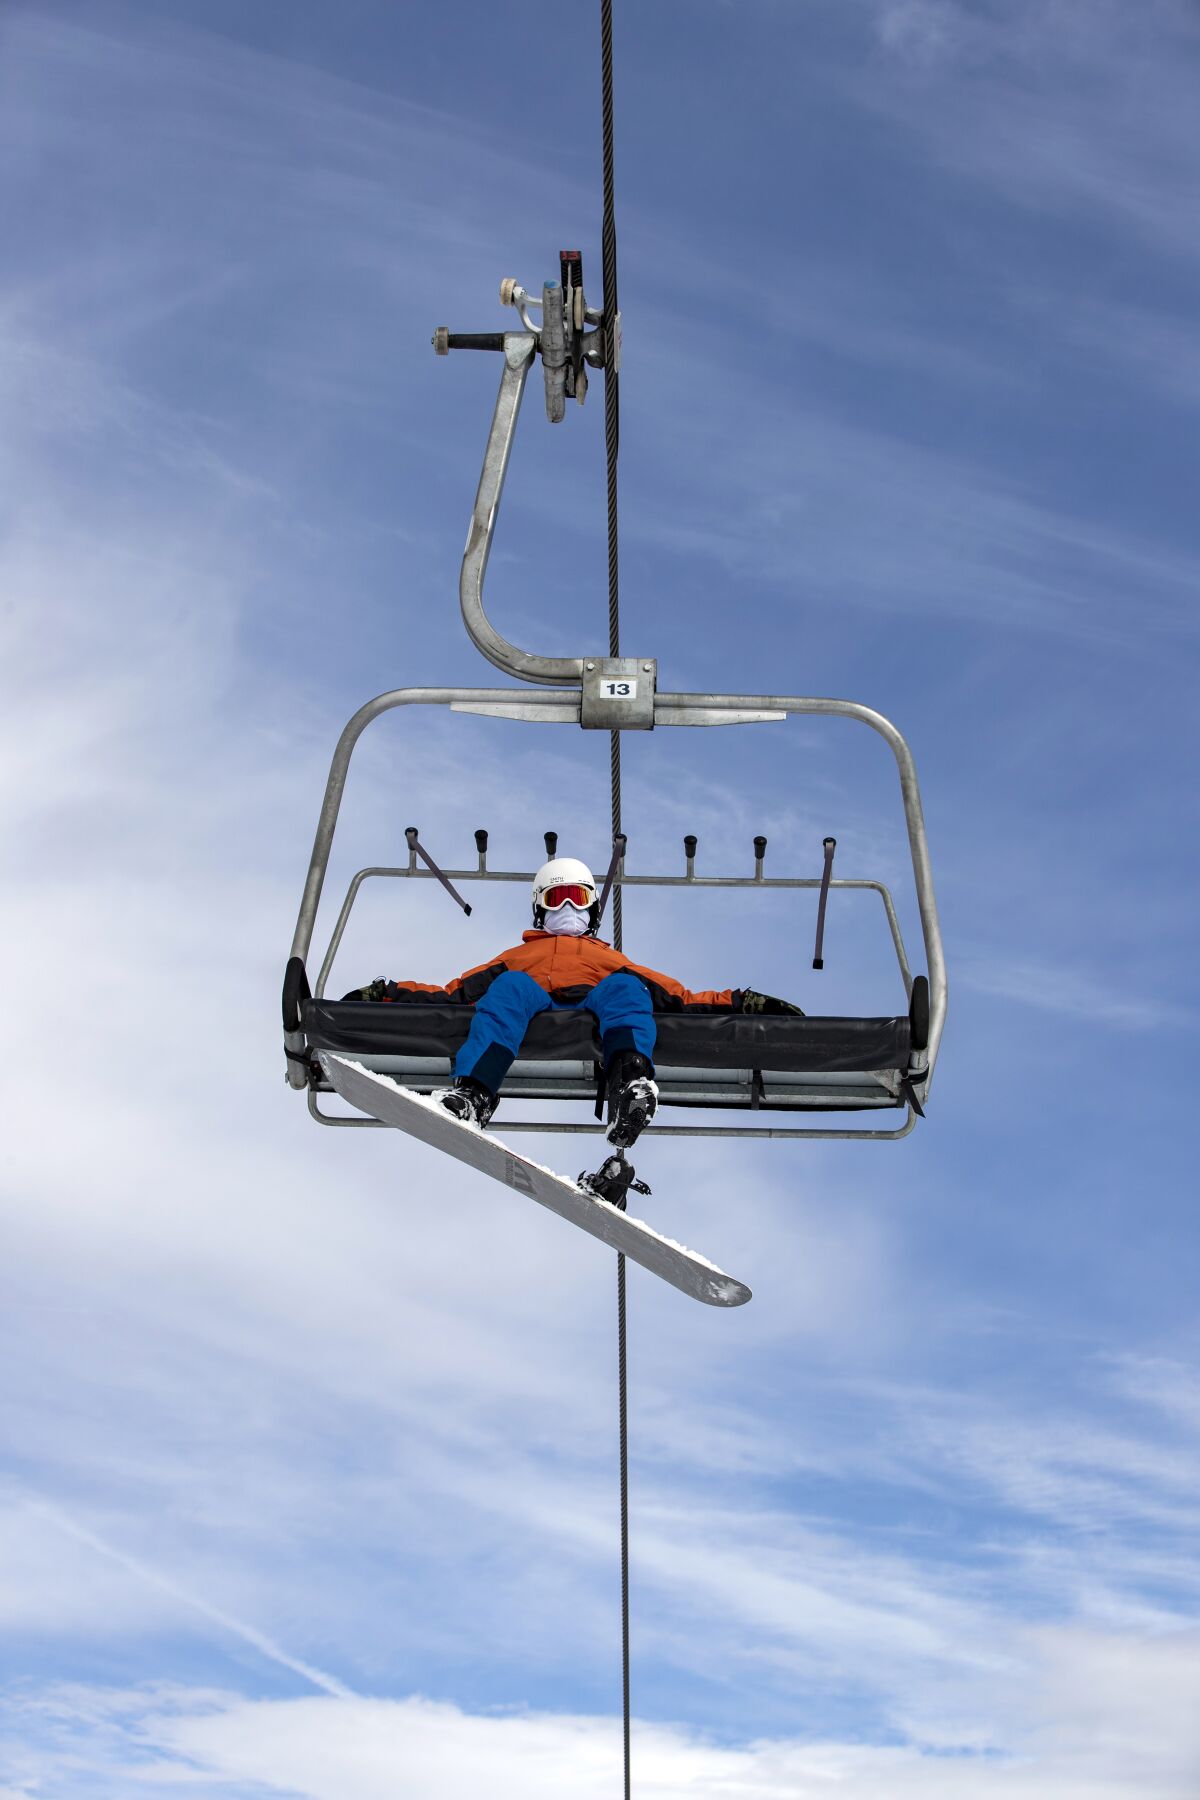 A solo snowboarder rides a chair lift wearing his face covering at Mammoth Mountain